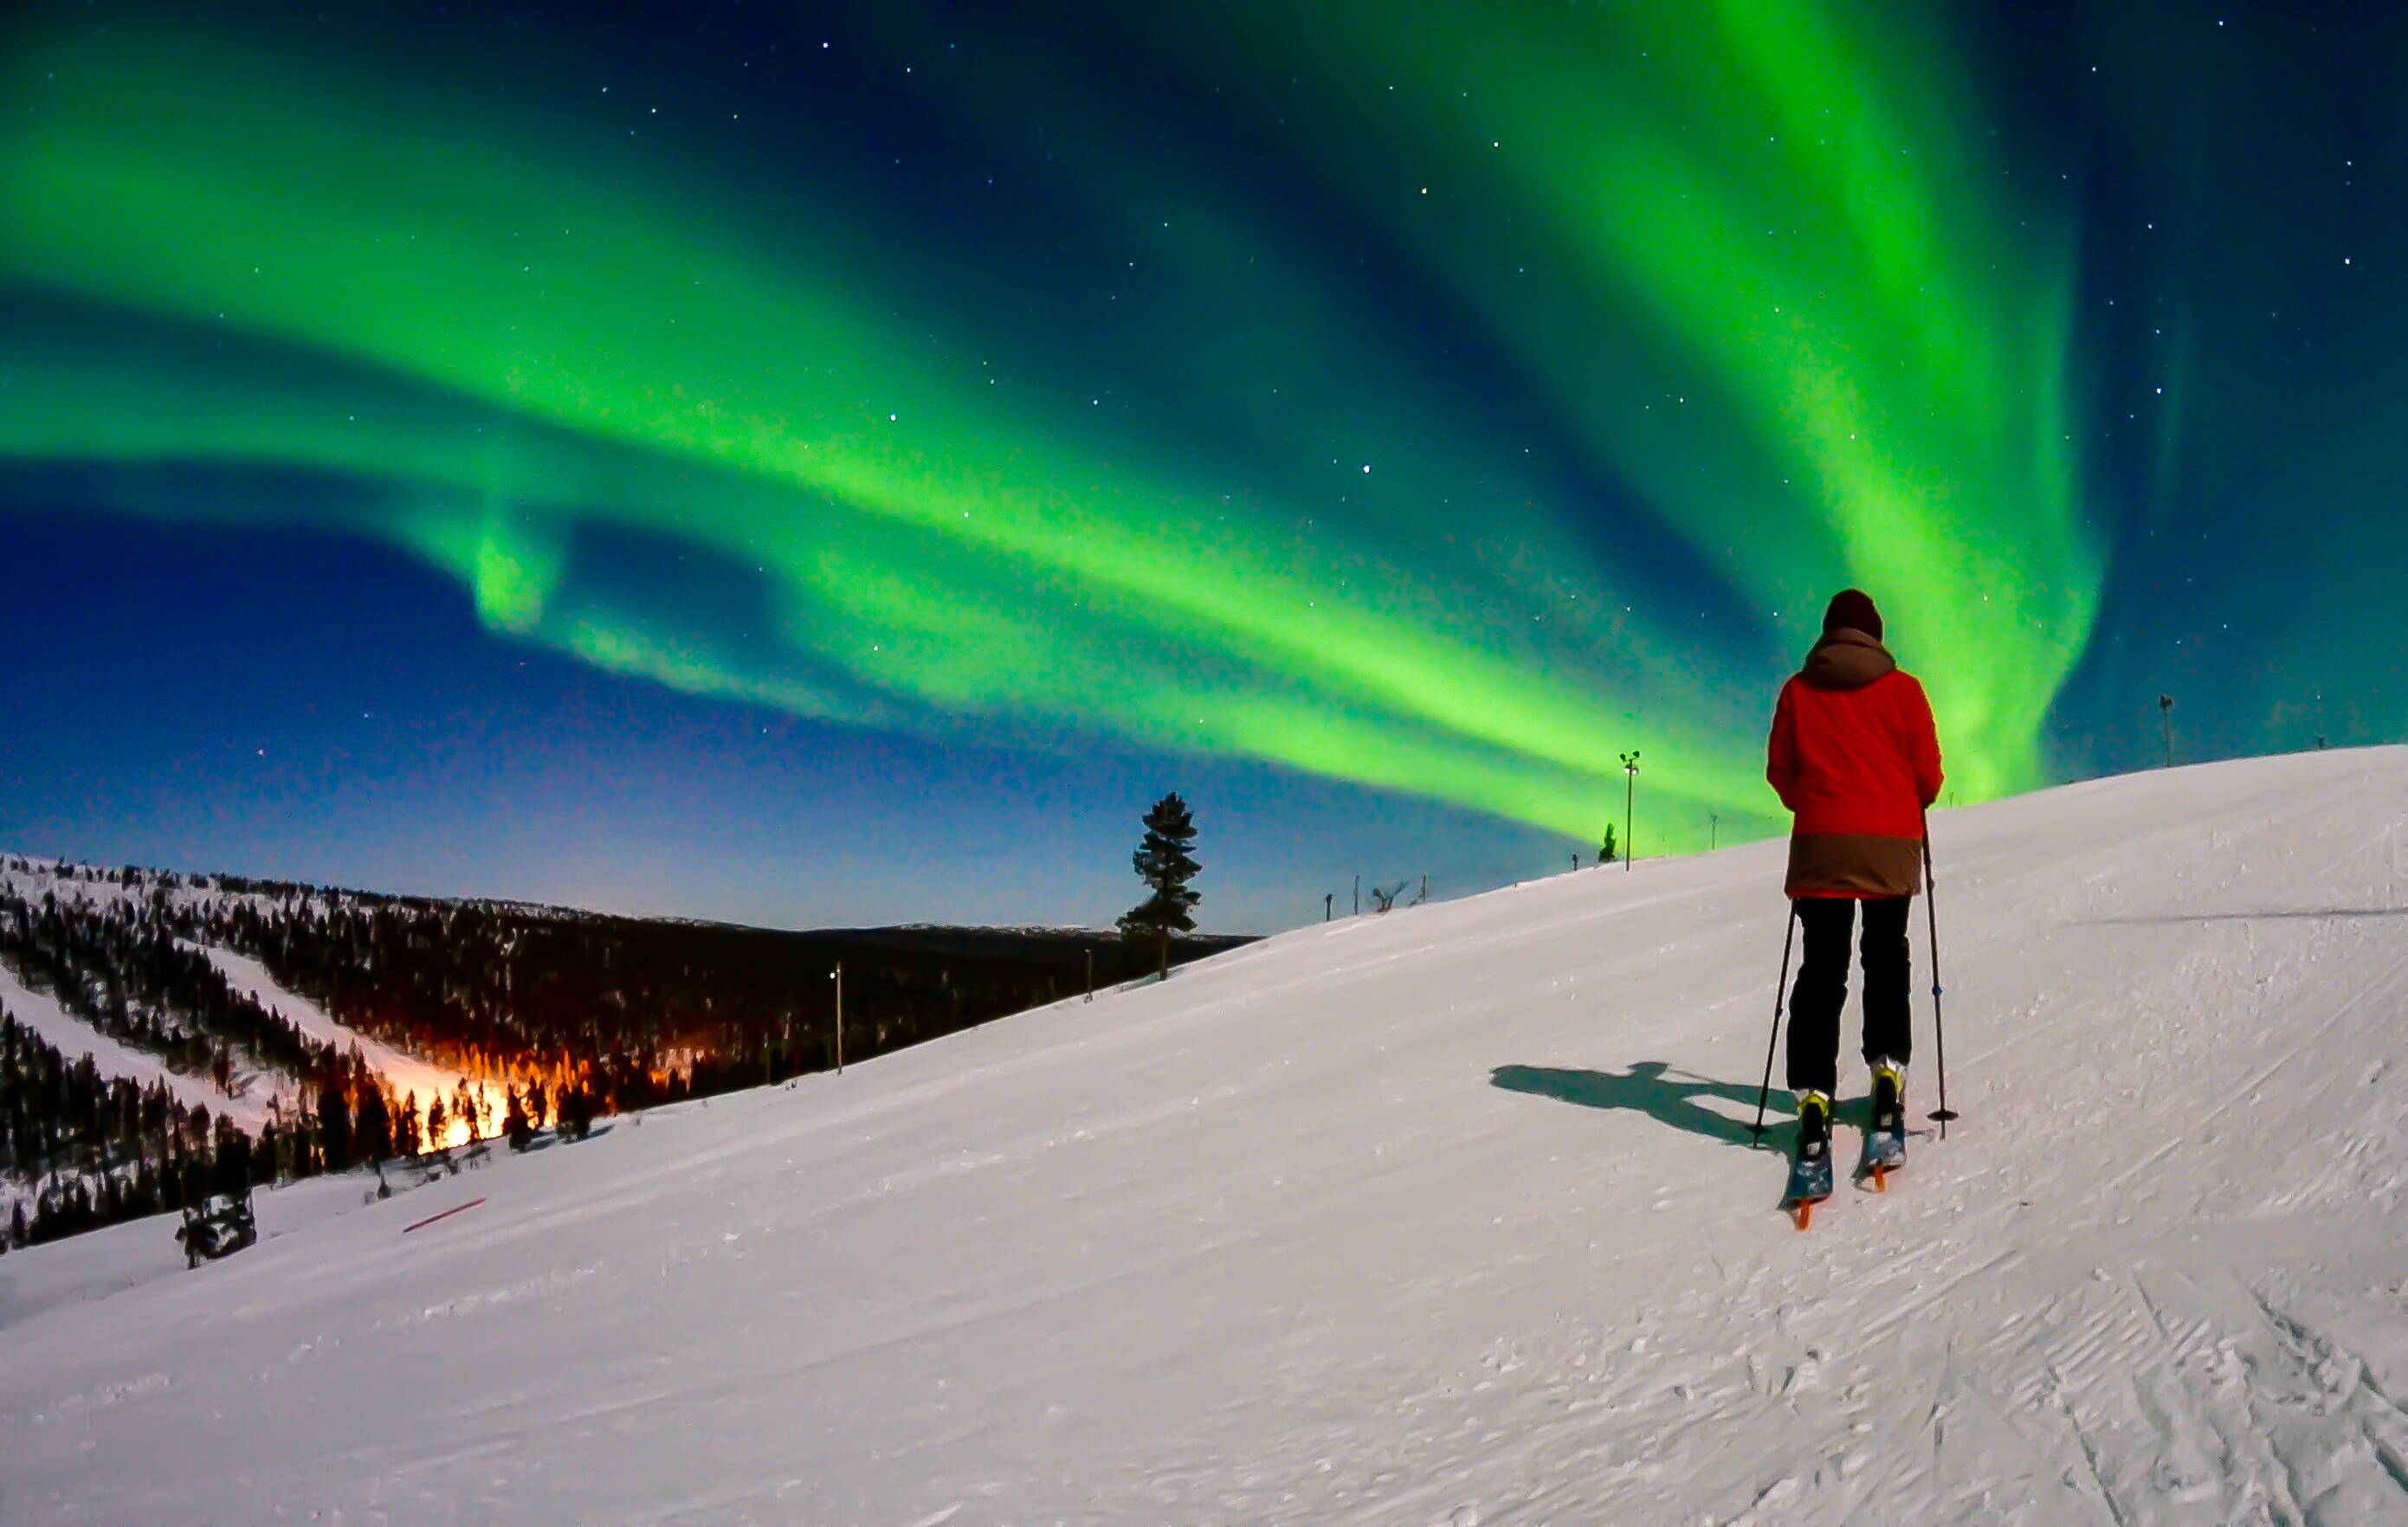 Skier staring at the Northern Lights above the ski slopes in Saariselkä, Finland.